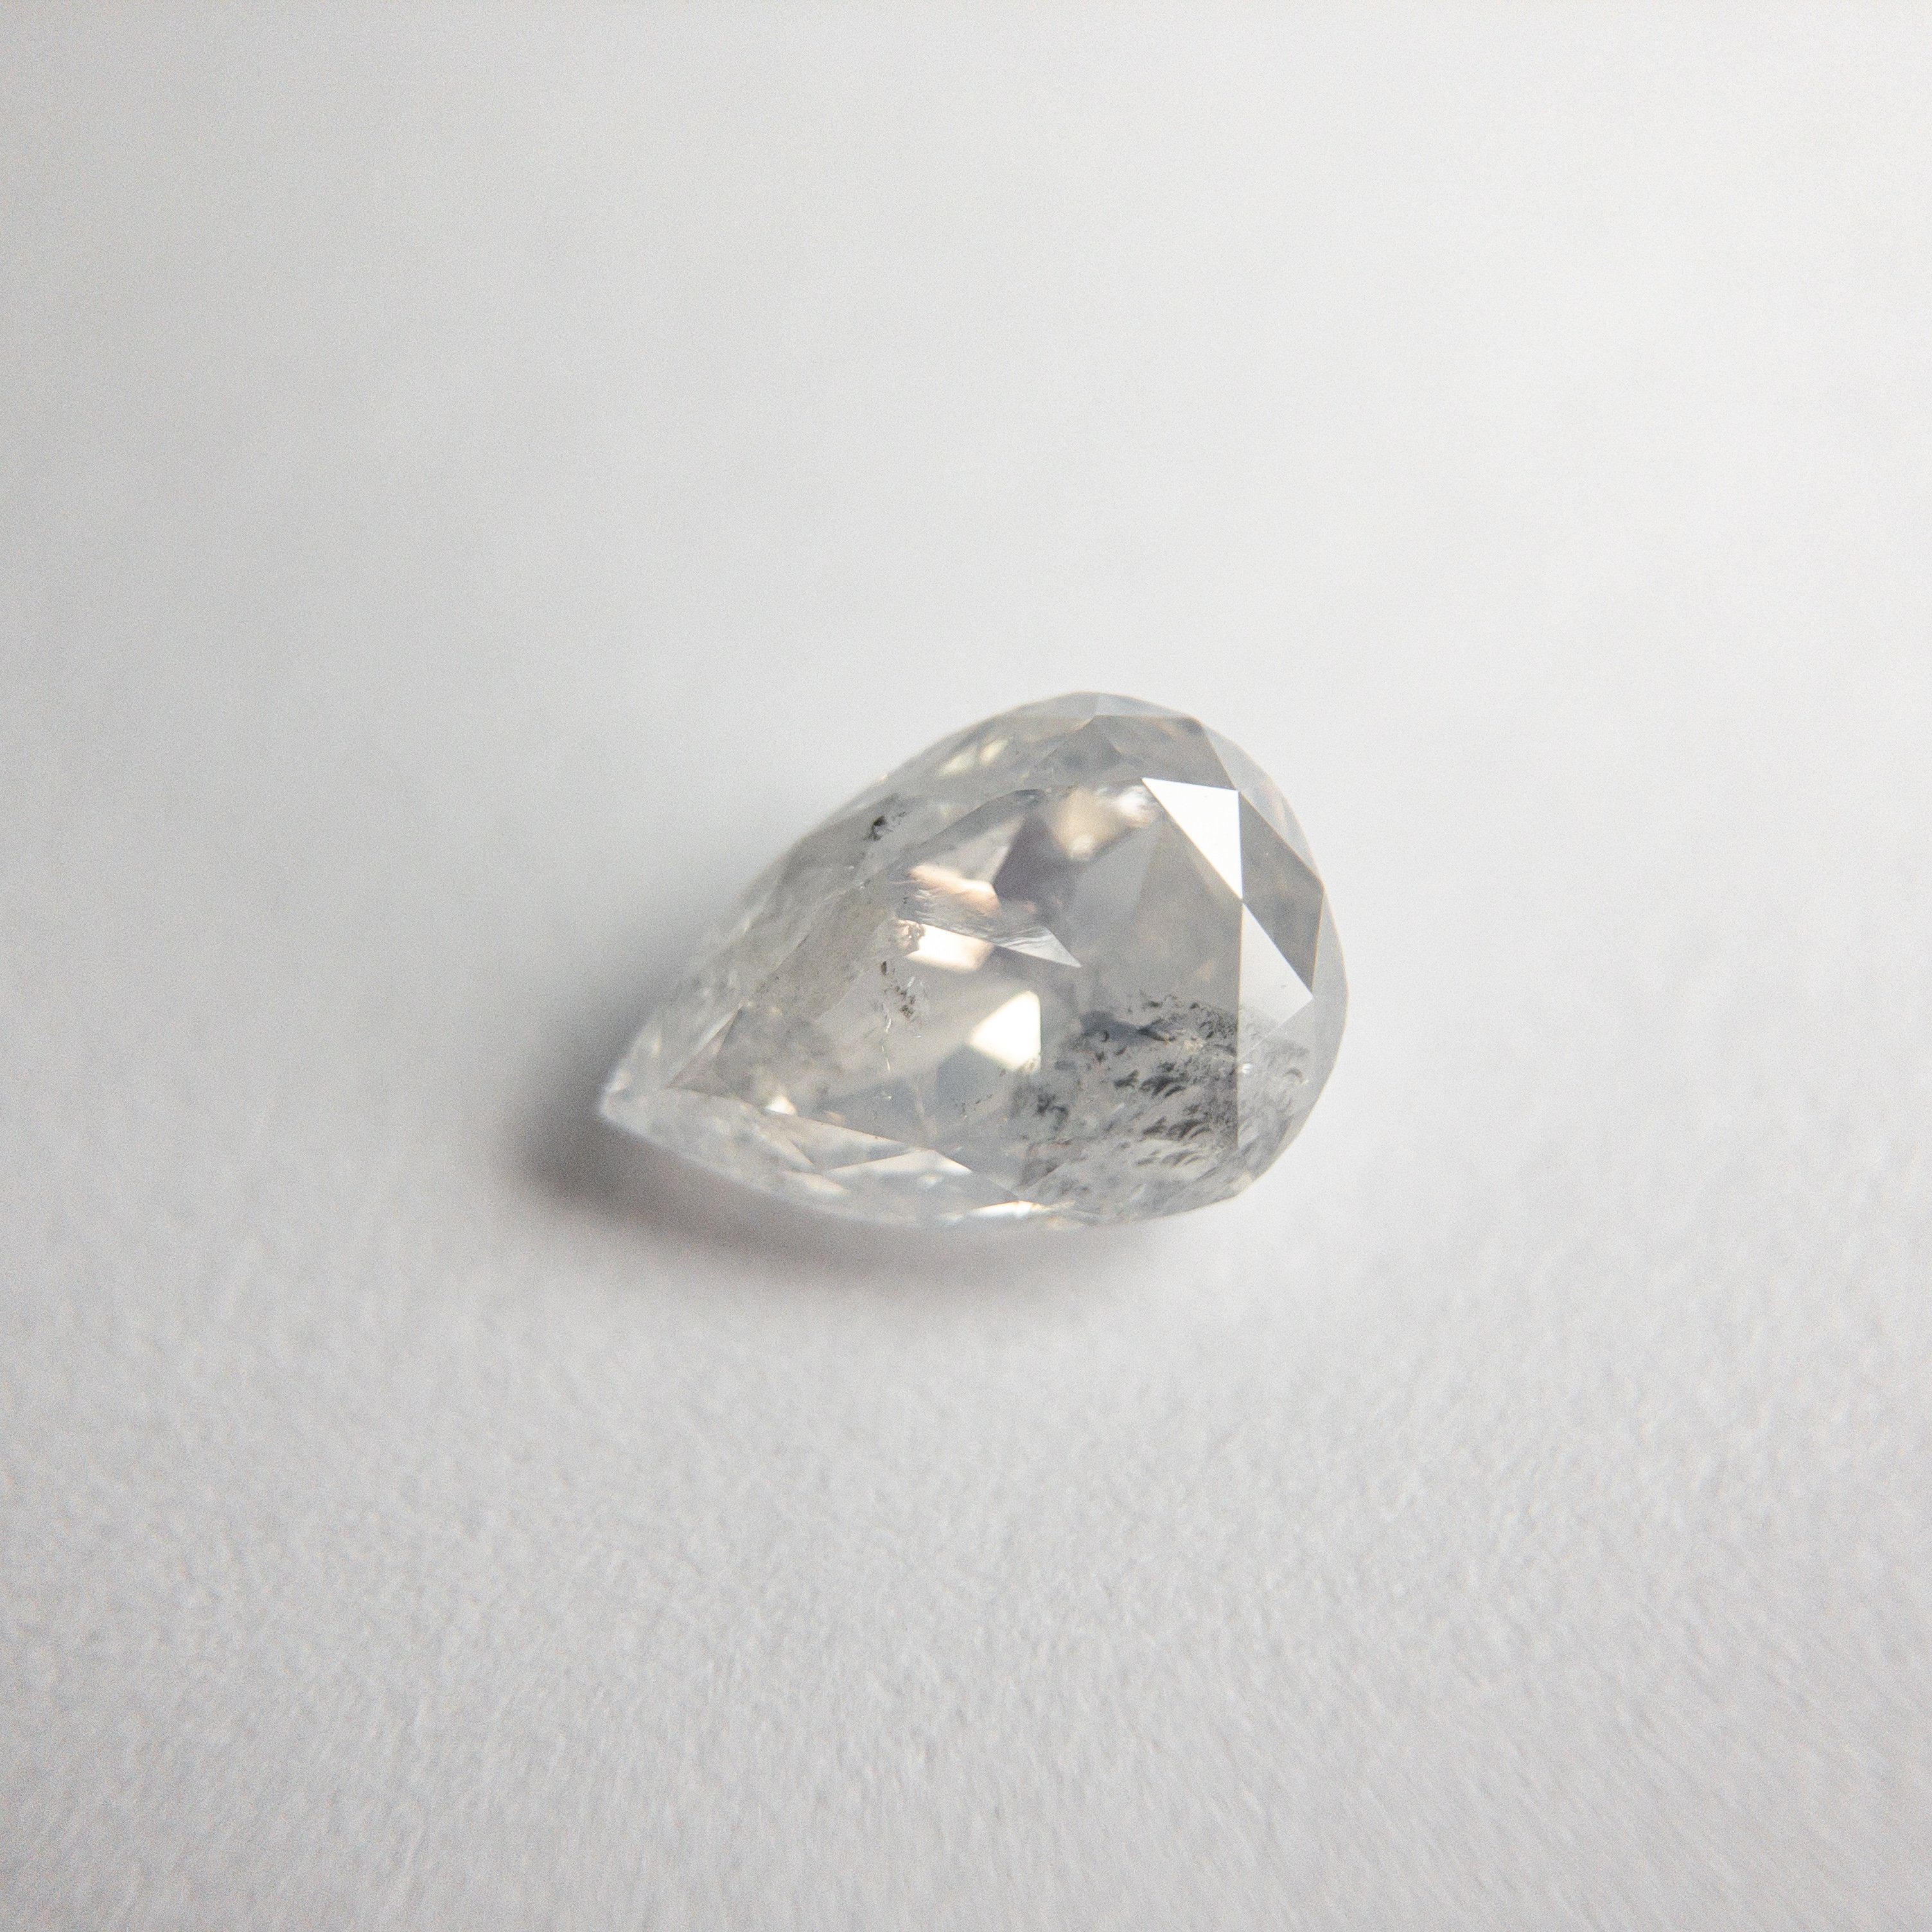 0.78ct 6.85x4.81x3.08mm Opalescent Pear Double Cut 18486-08